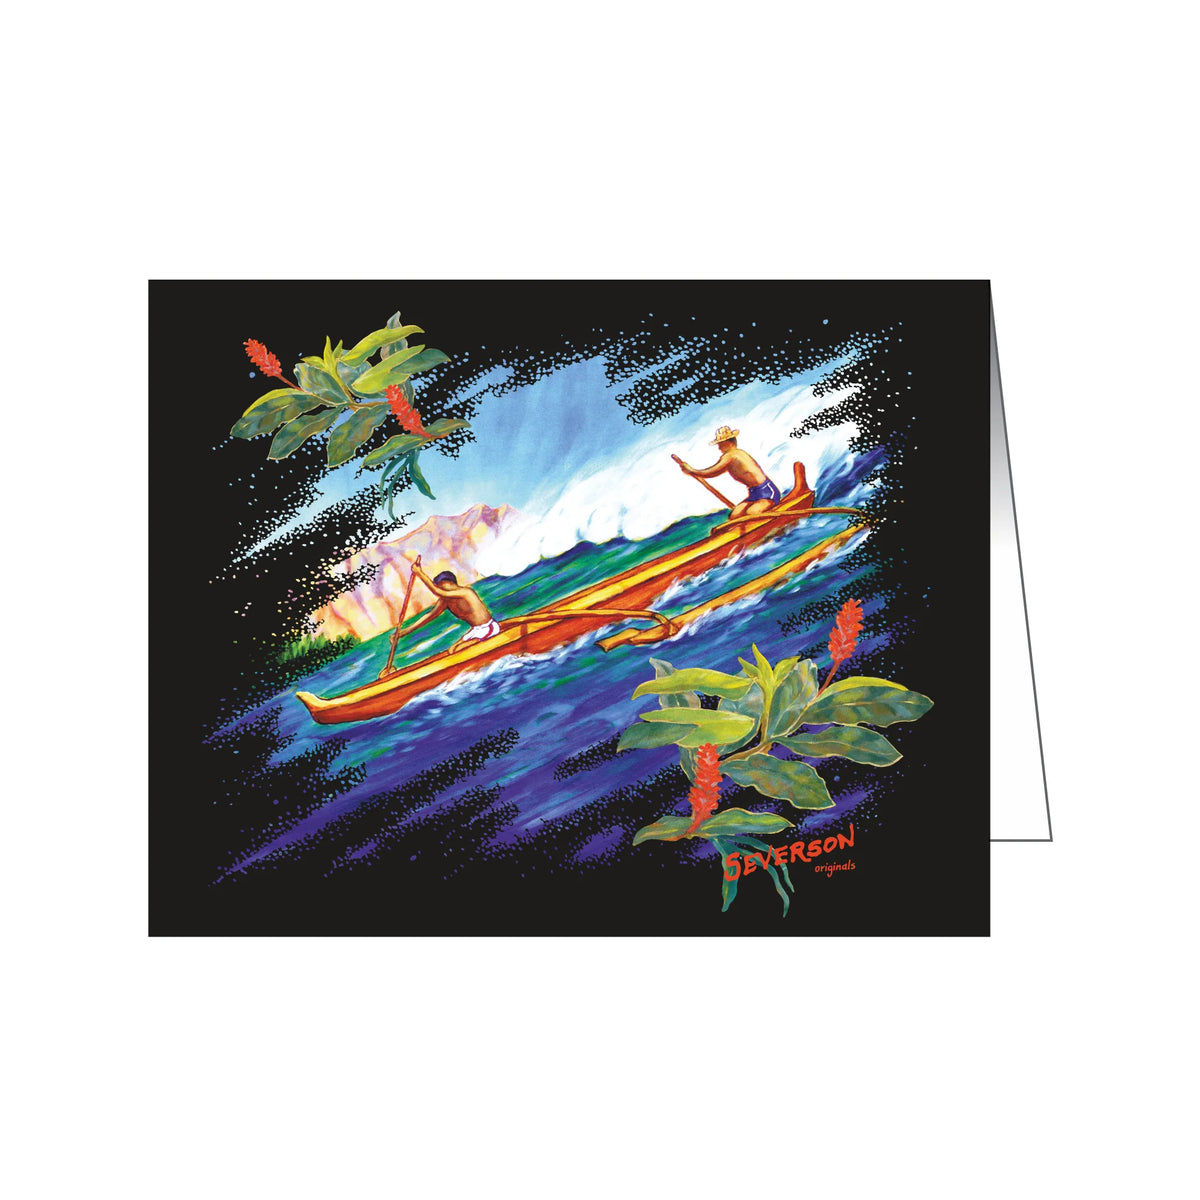 SEVERSON "OUTRIGGER" GREETING CARD